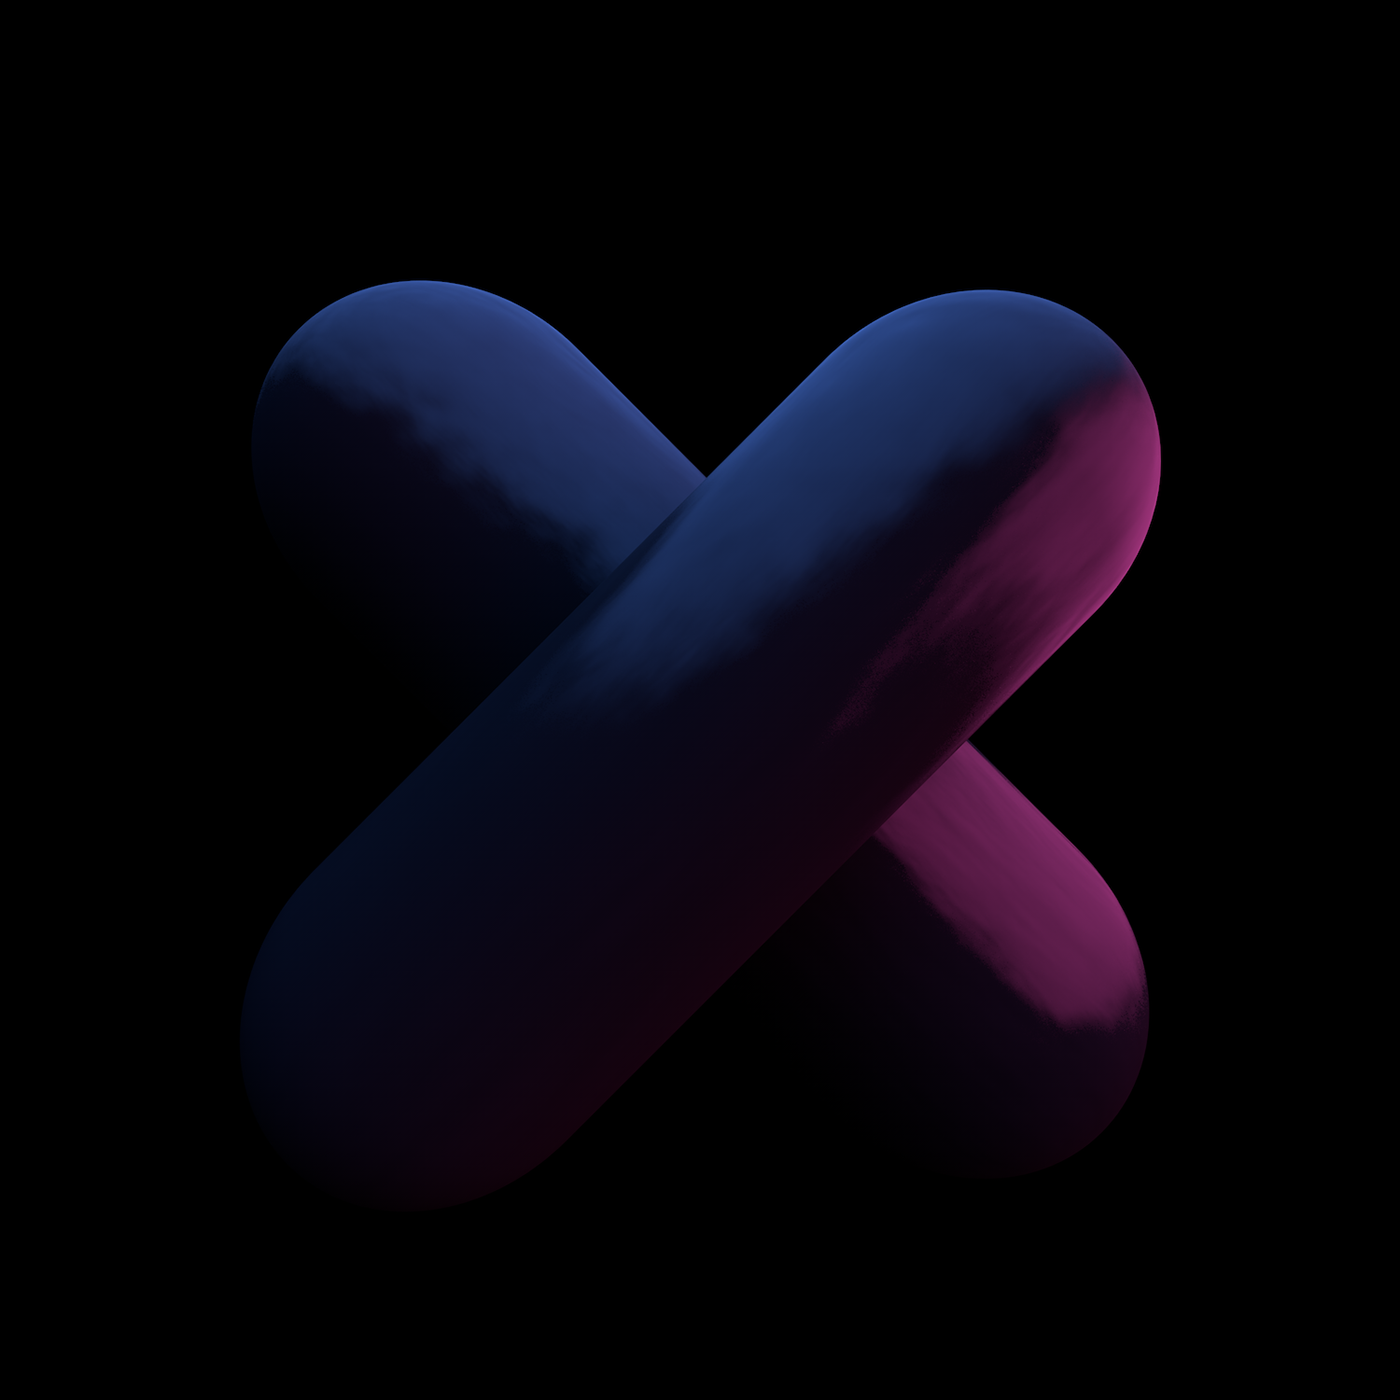 IIlustration typography   3D letters alphabet numbers type 36daysoftype graphic design 